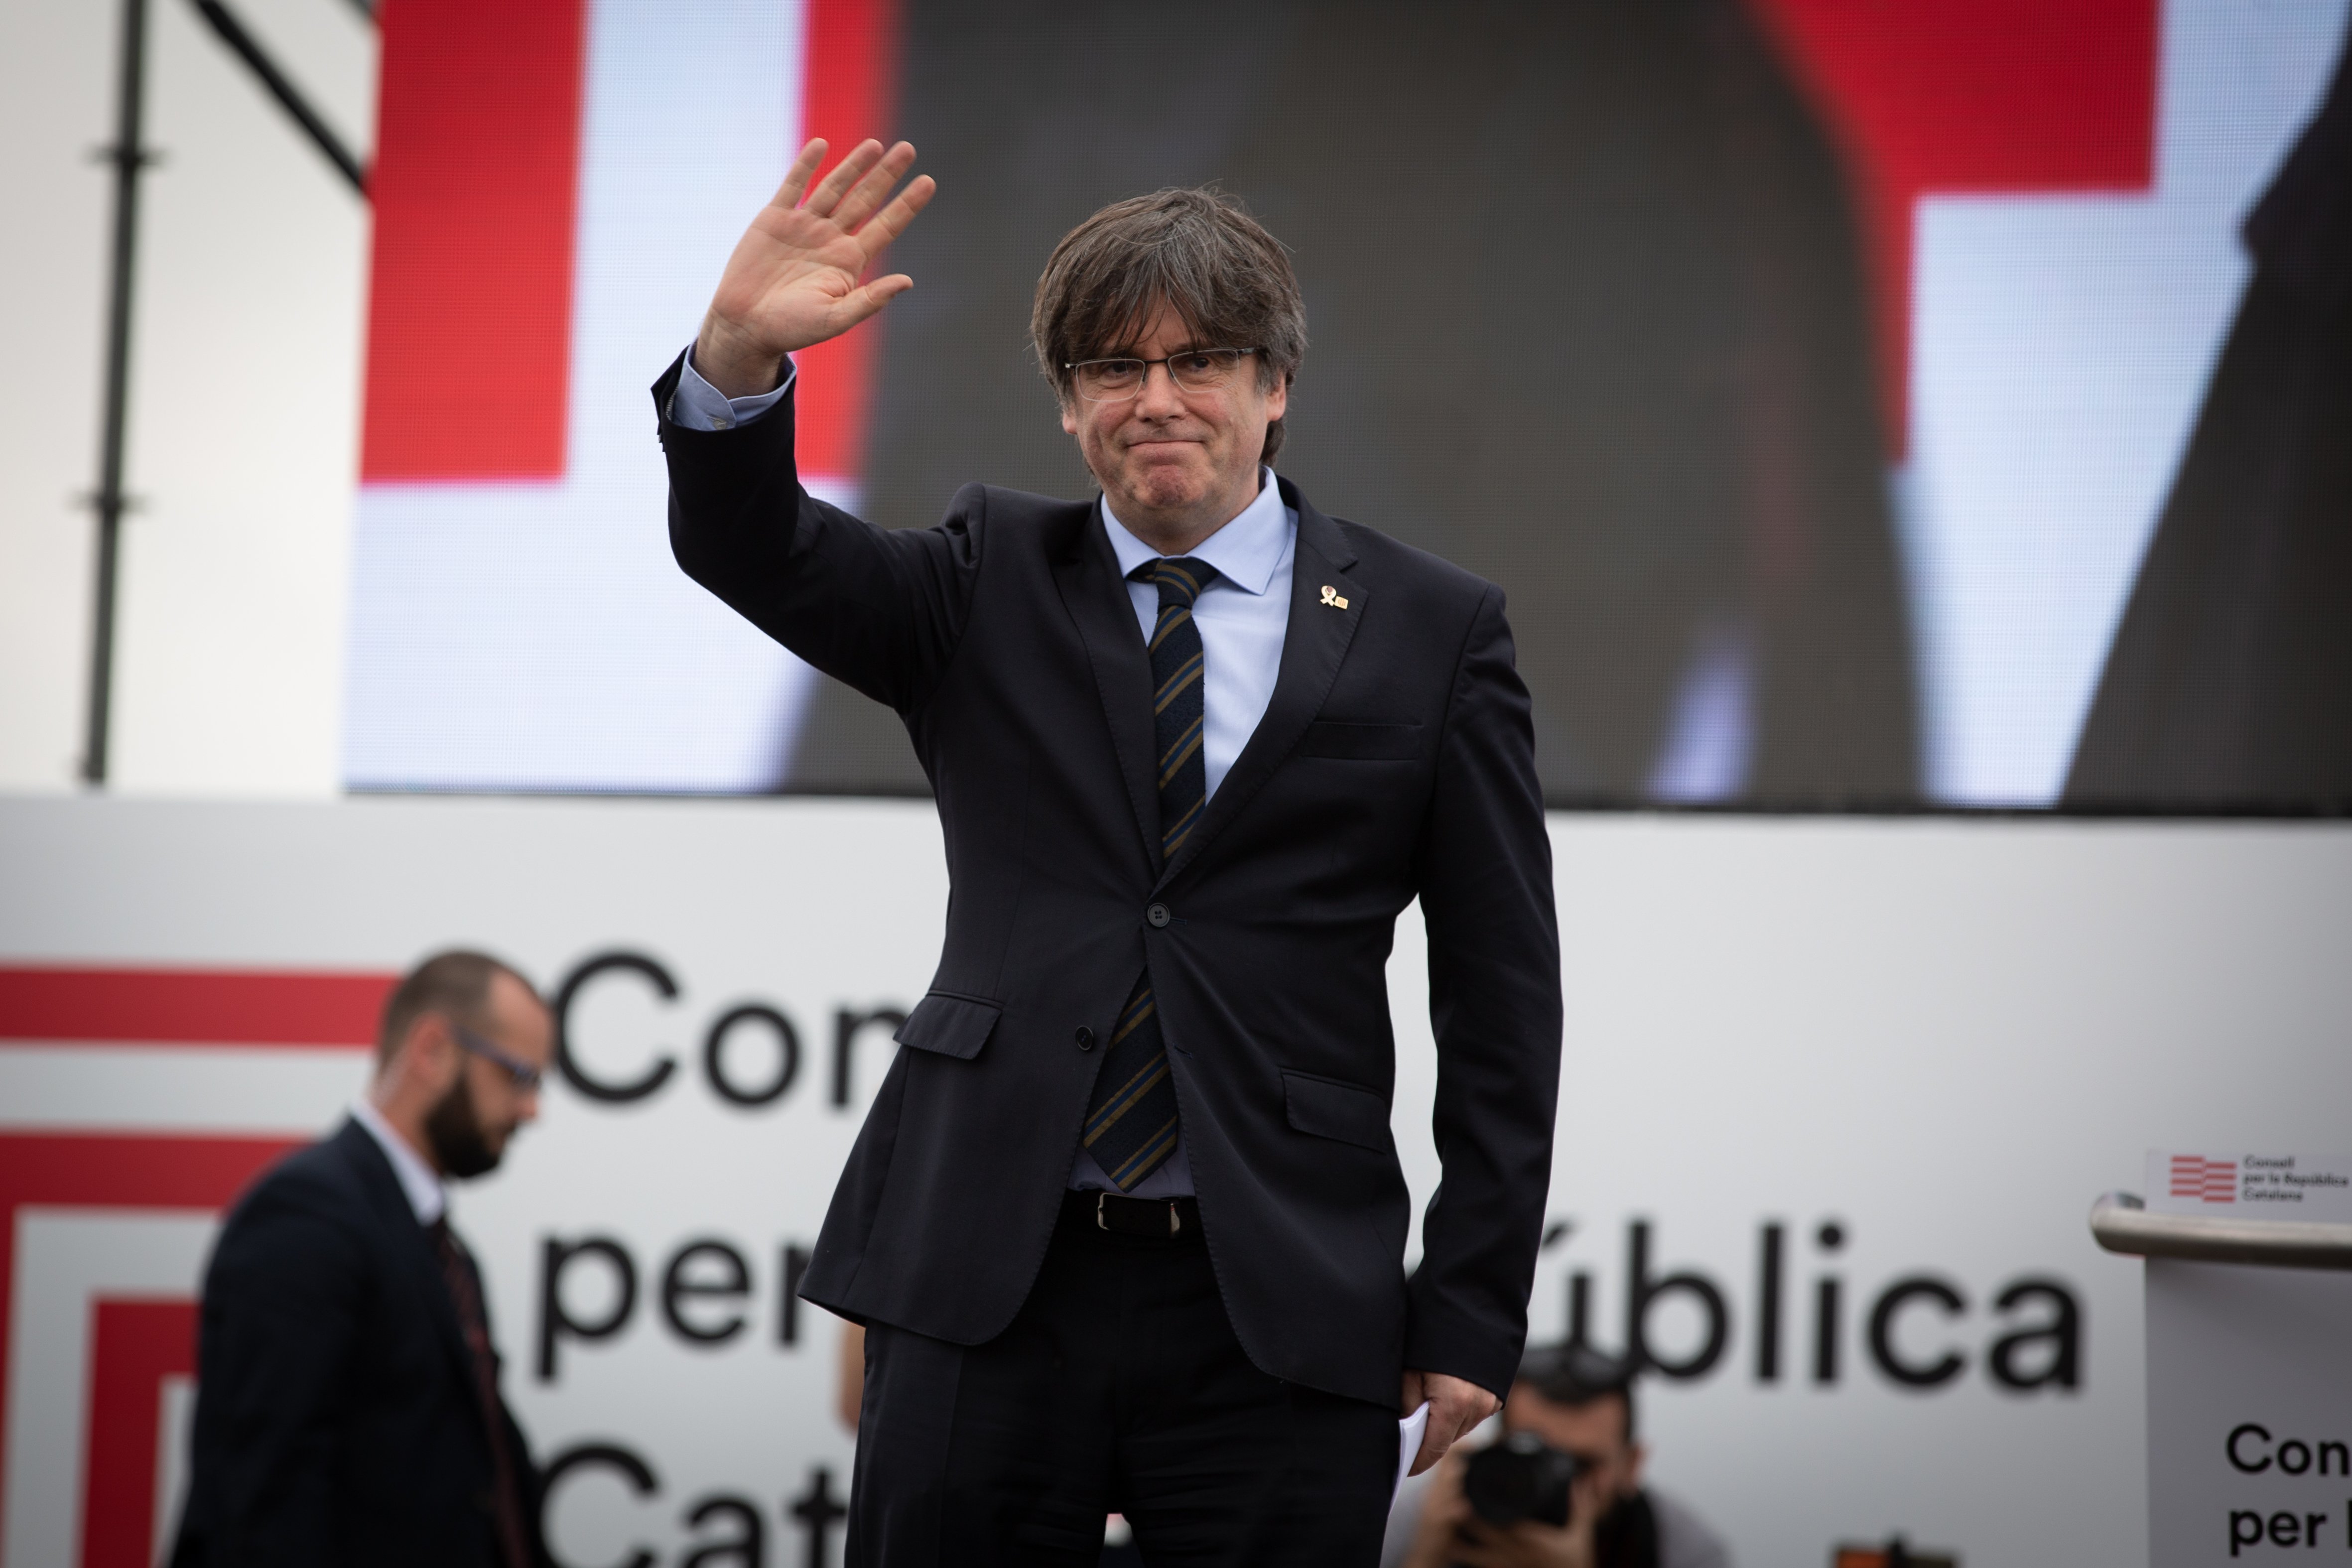 President Consell Republica Carles Puigdemont / Europa Press